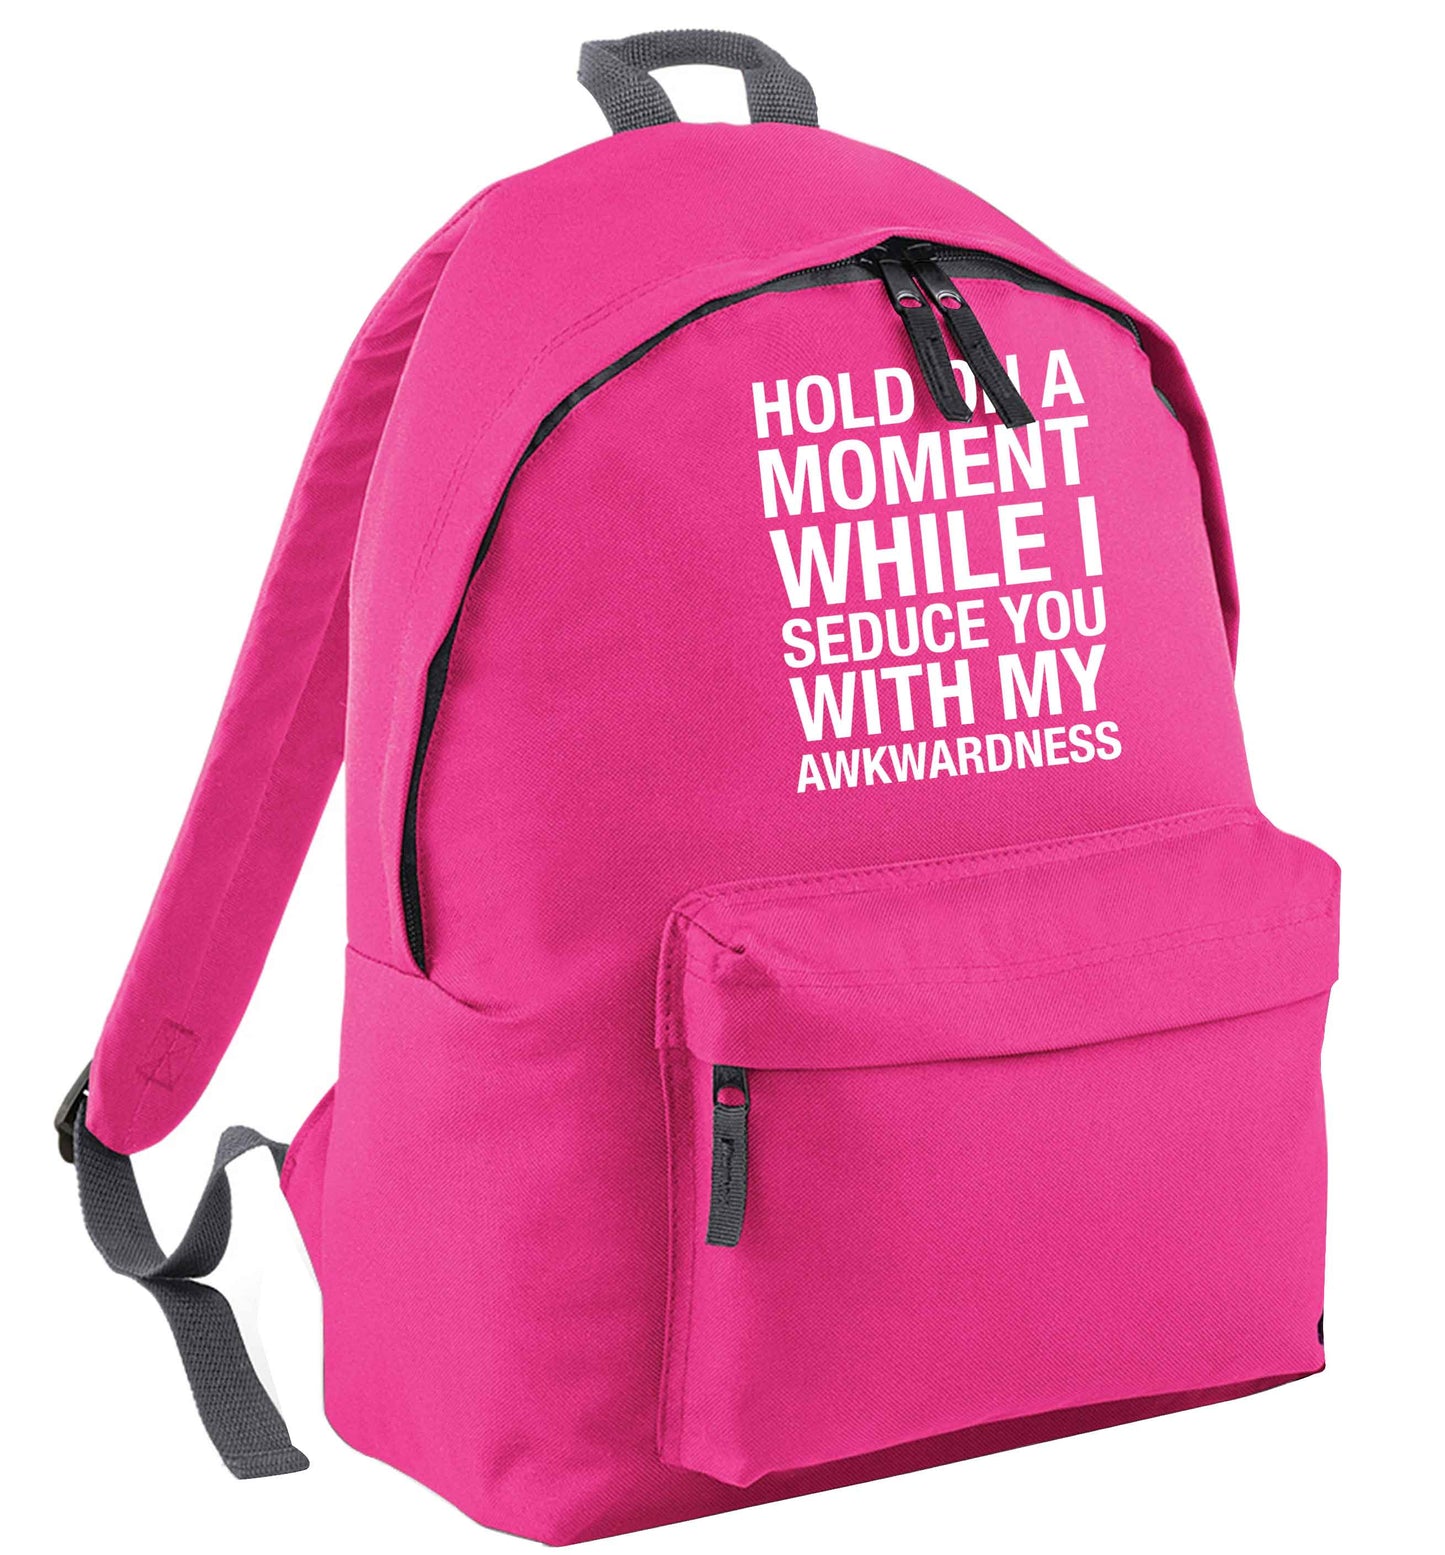 Hold on a moment while I seduce you with my awkwardness pink adults backpack